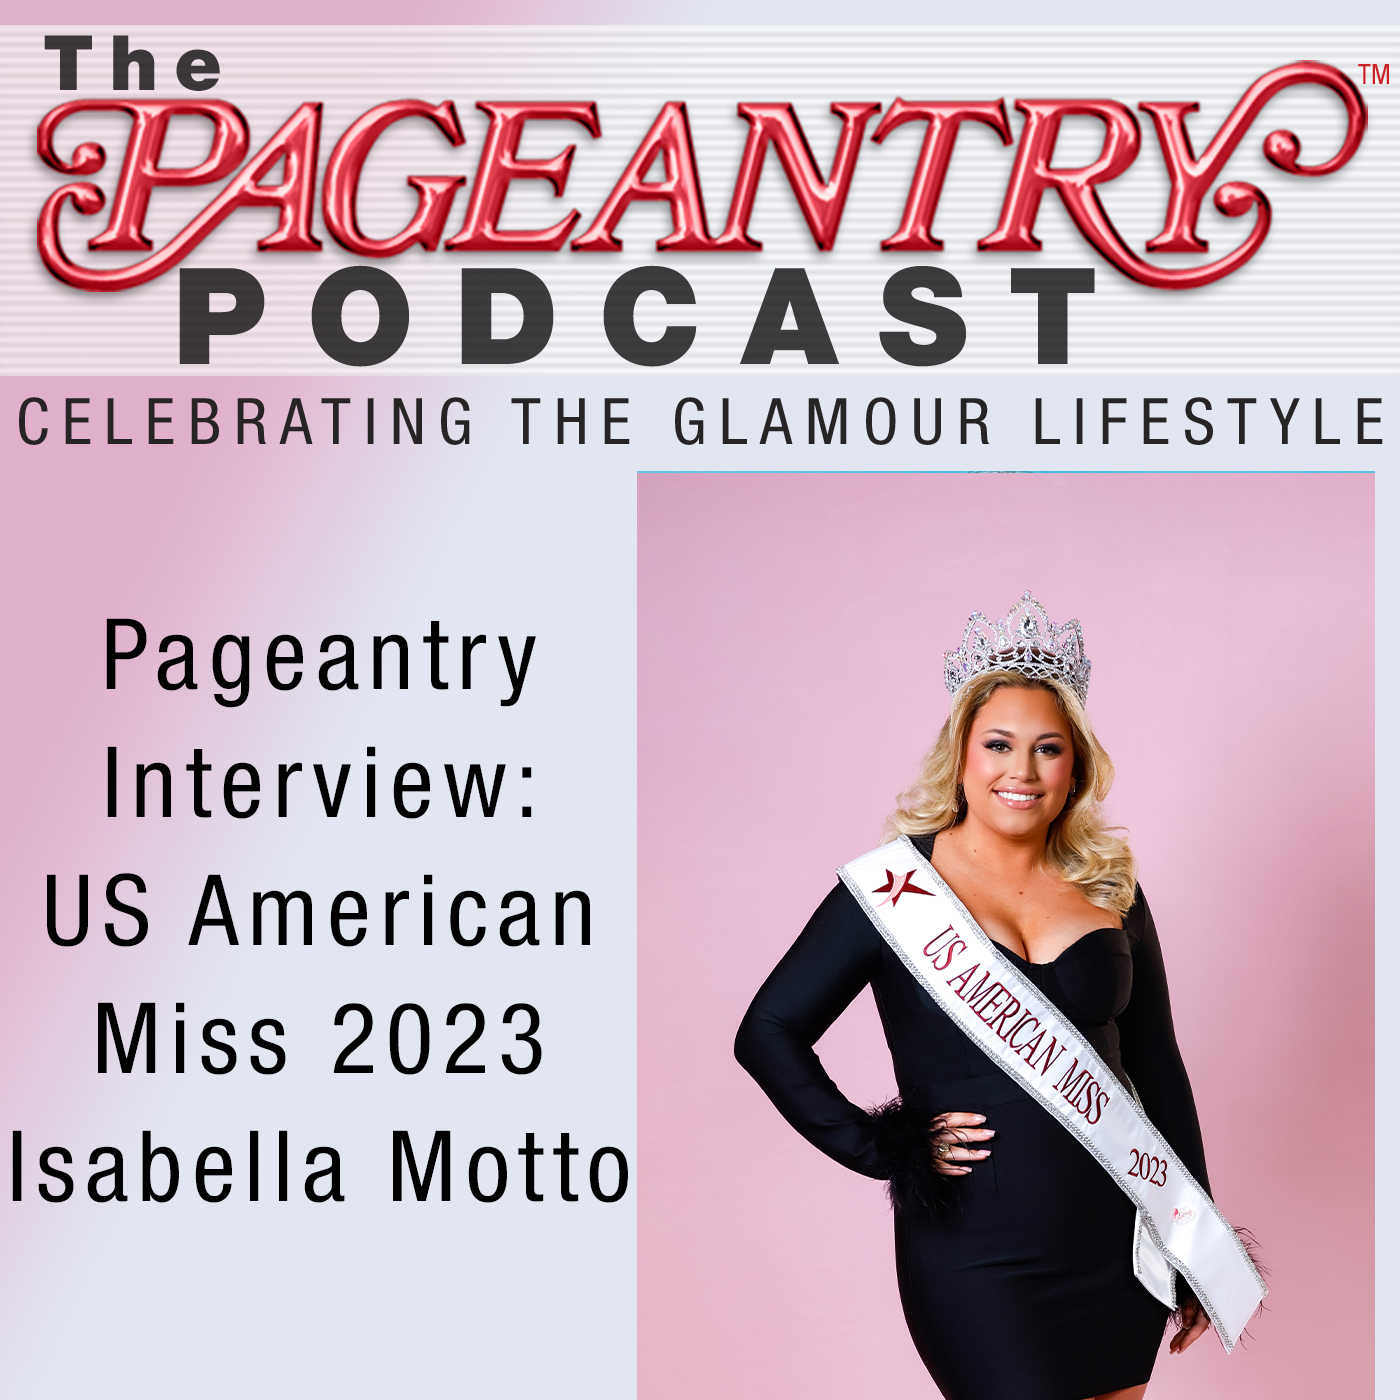 usam pageant, infinite eight pageant, us american miss pageant, national pageant, pageant interview, pageant podcast, pageantry, pageantry magazine